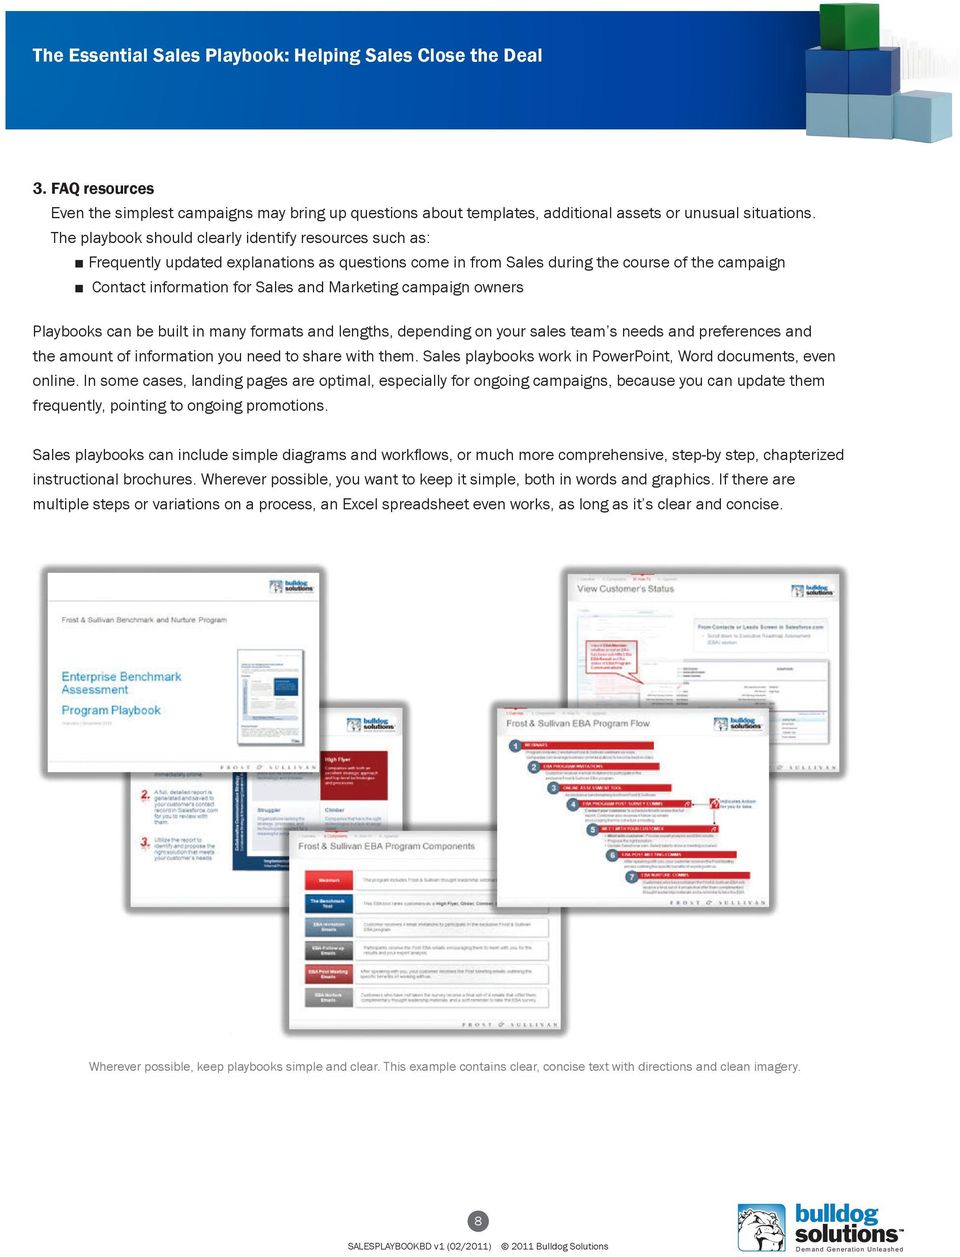 campaign owners Playbooks can be built in many formats and lengths, depending on your sales team s needs and preferences and the amount of information you need to share with them.